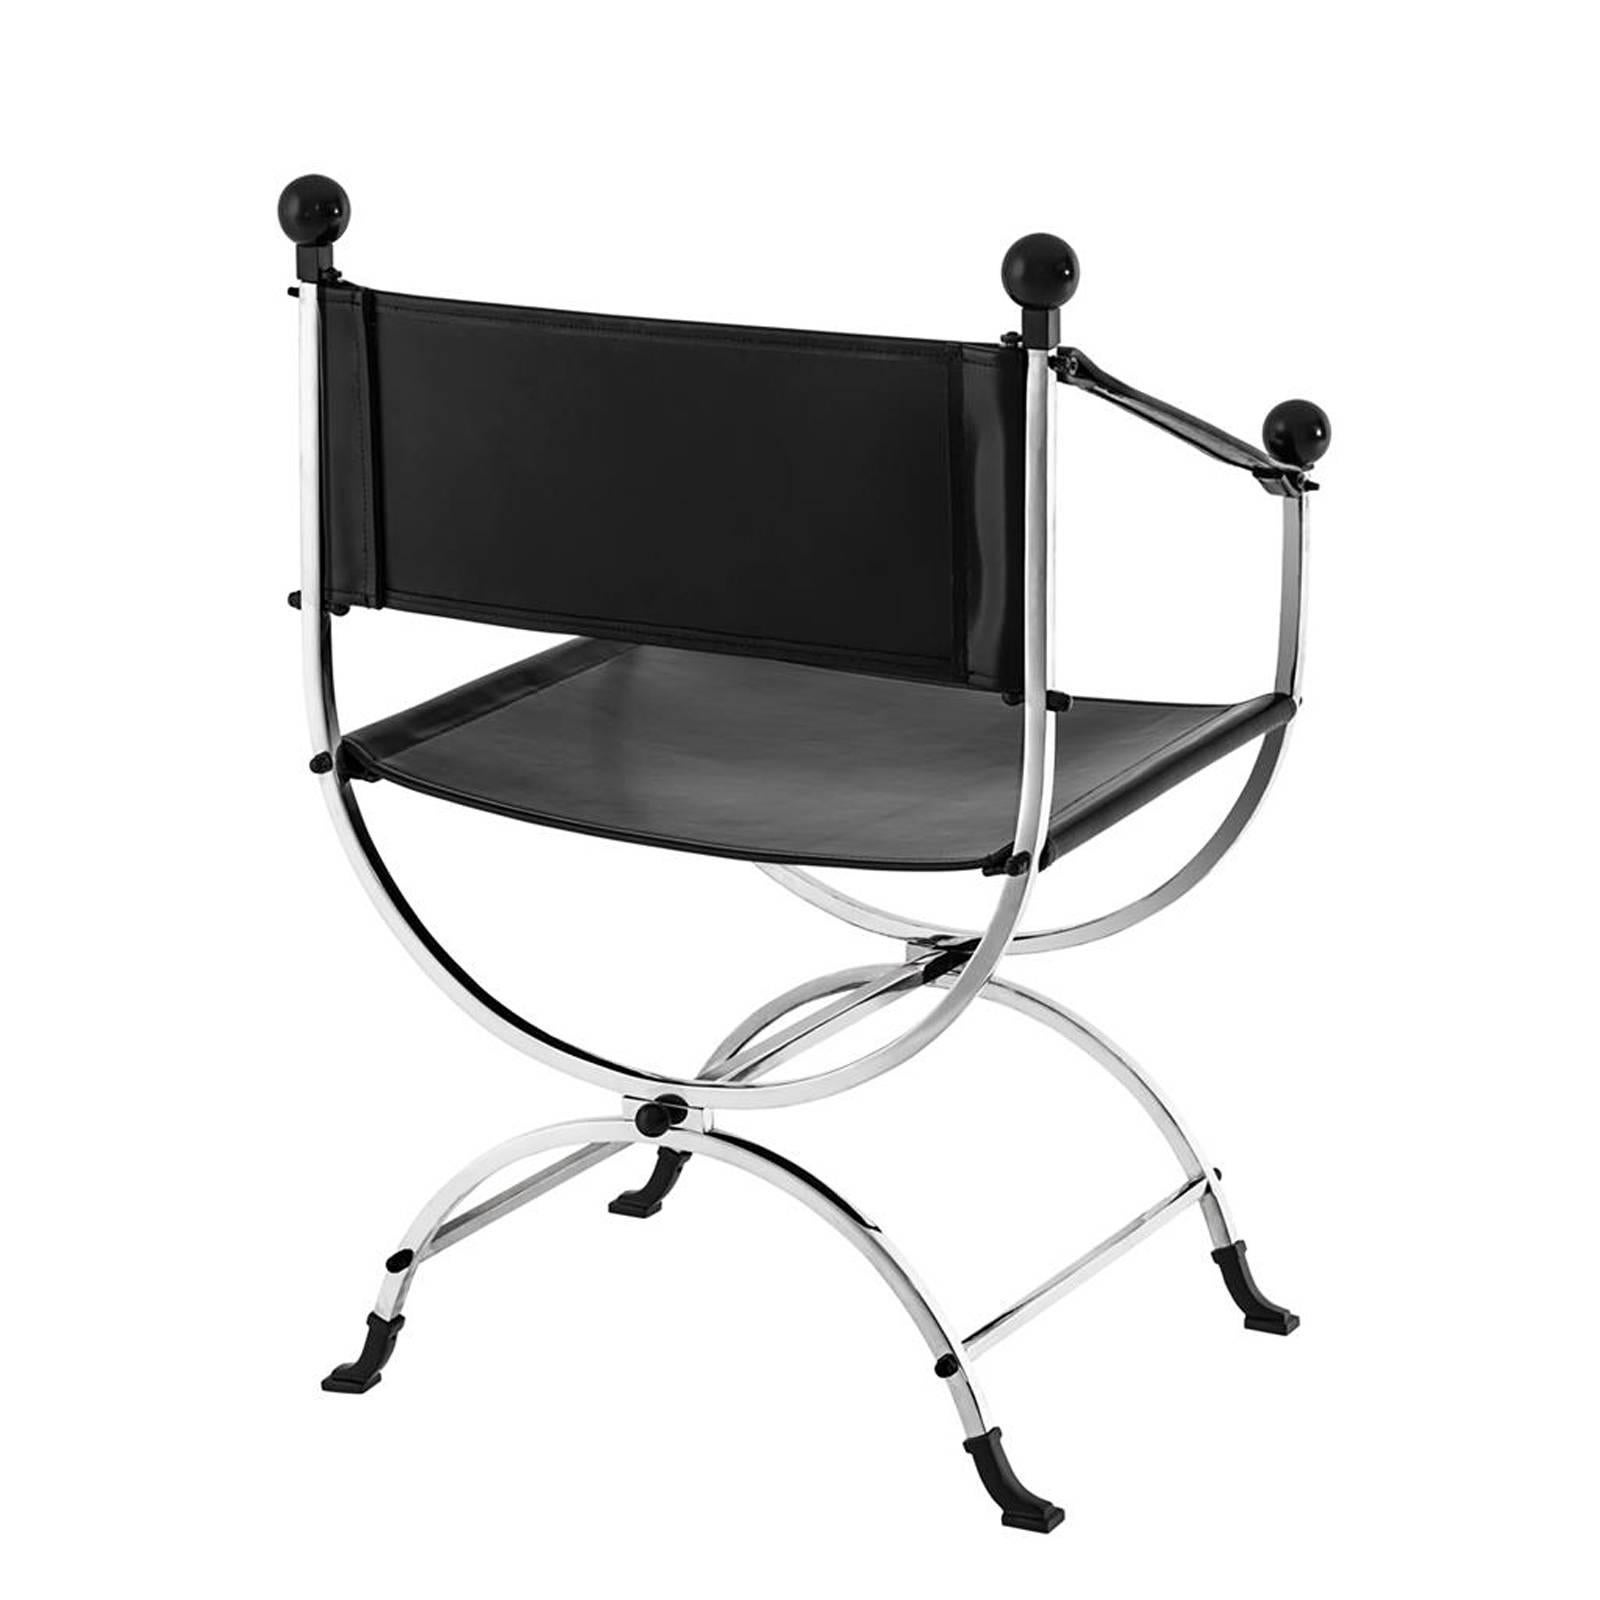 Indian Hilton Chair in Nickel Finish and Black Leather